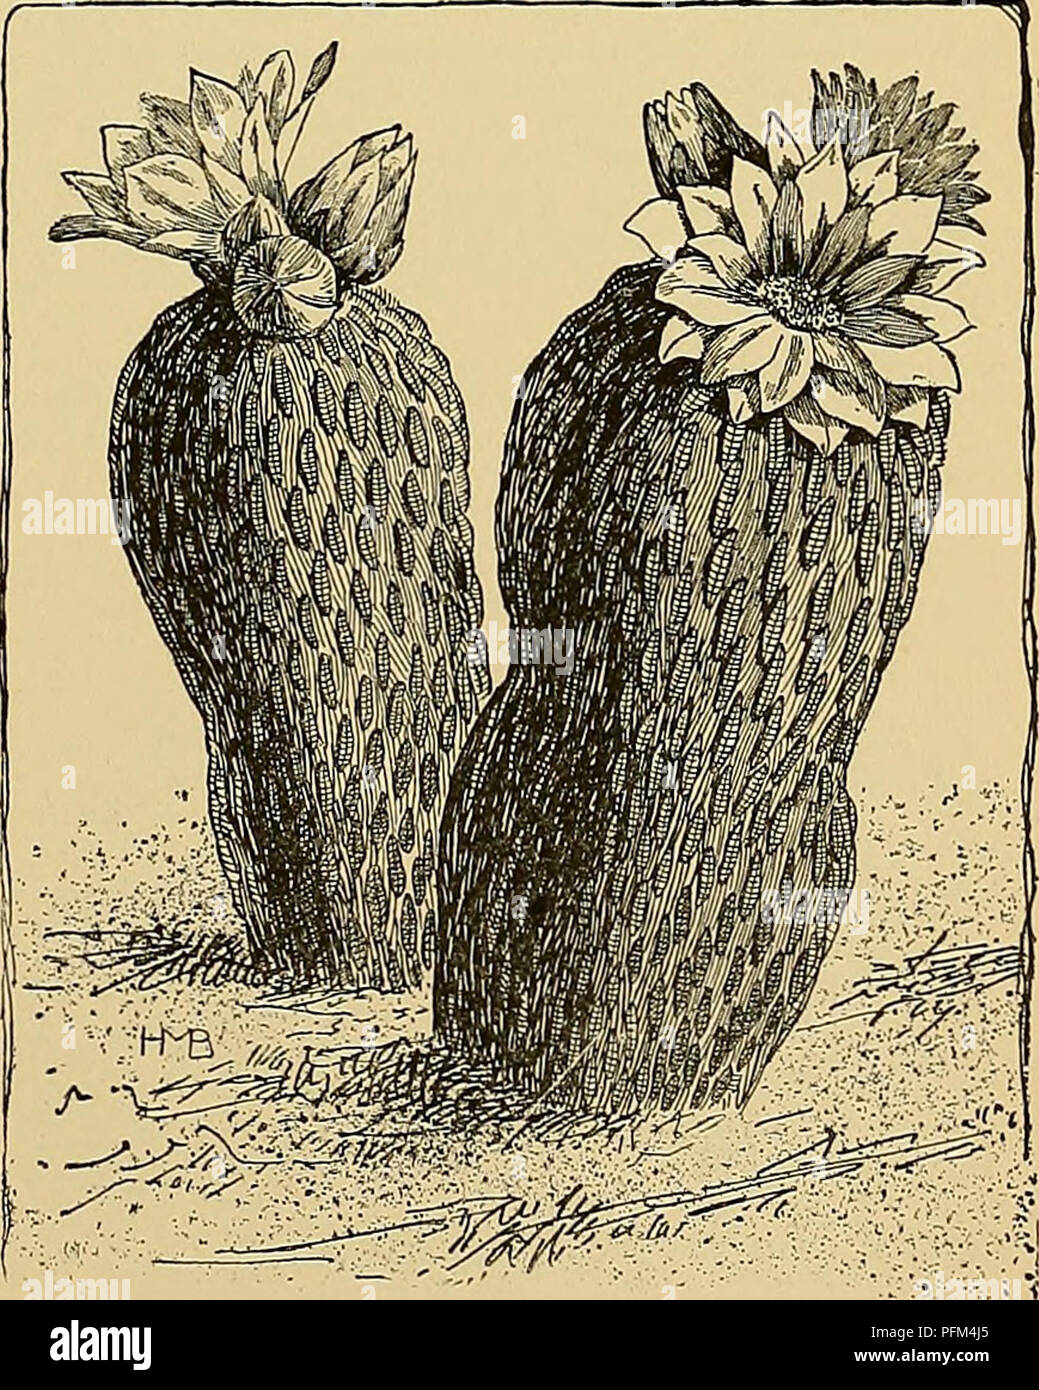 . Cyclopedia of American horticulture, comprising suggestions for cultivation of horticultural plants, descriptions of the species of fruits, vegetables, flowers, and ornamental plants sold in the United States and Canada, together with geographical and biographical sketches. Gardening. 302. Showine the remarkable condensation of the plant body in a cactus—Mamillaria micromeris. CACAJA6FSIS (Cacalia-like). Compdsitm. One spe- cies, with discoid, very many-fld. heads of perfect yel- low florets, and palmate Ivs. Nard6smia, Gray. Strong perennial, 1-2 ft. high, loose, woolly, but becoming nearly Stock Photo